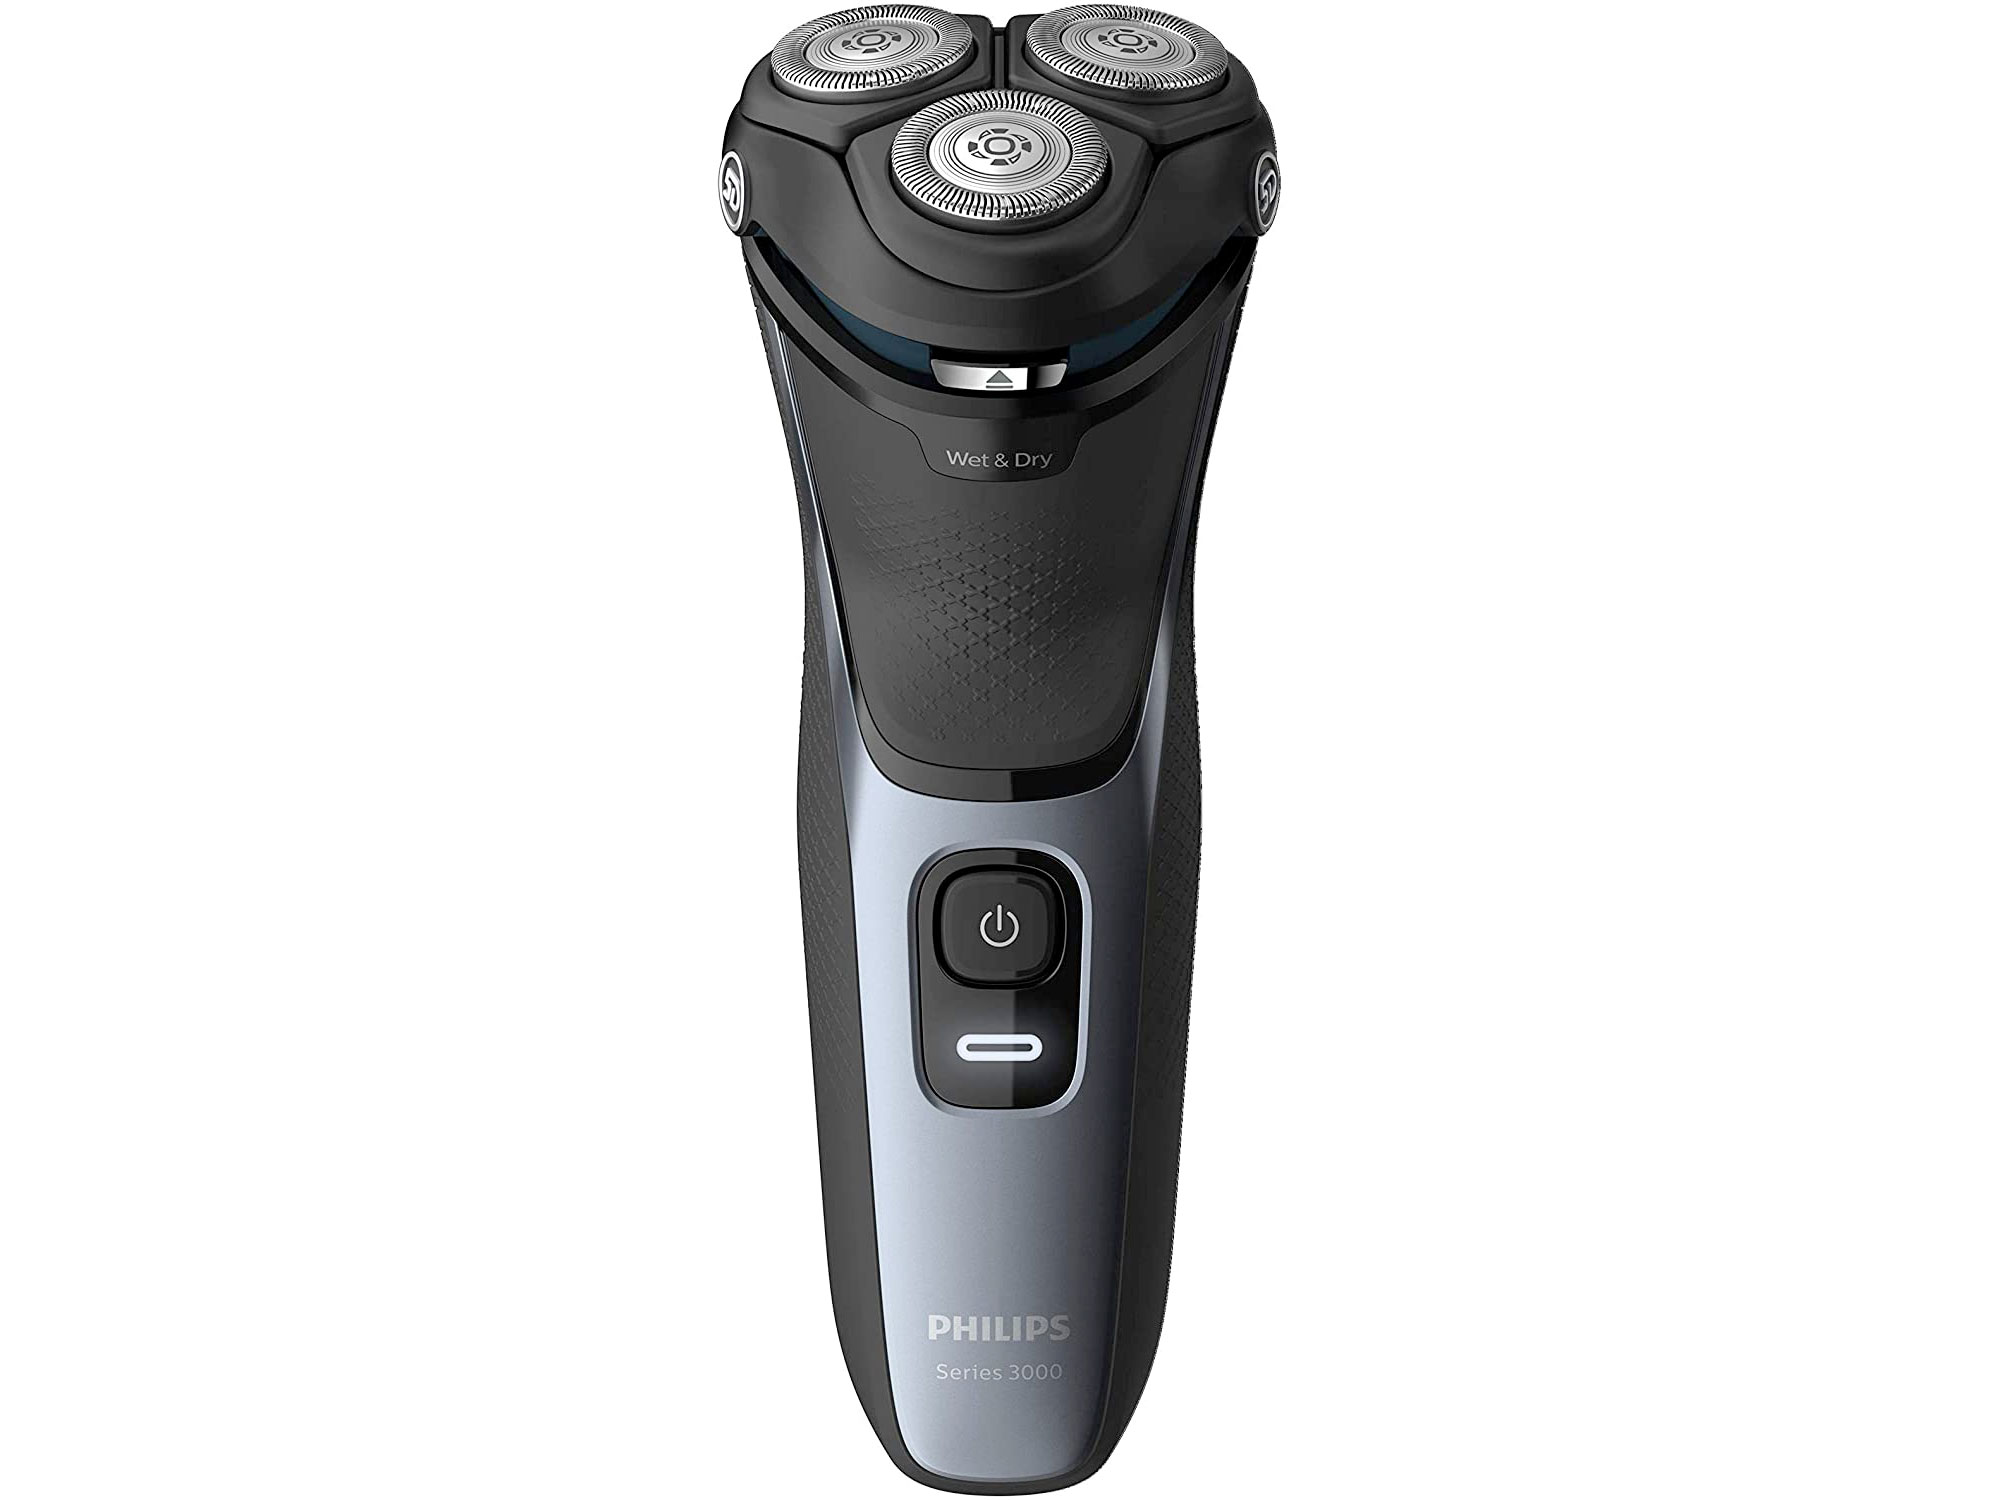 Amazon：Philips Shaver Series 3000 with Pop-Up Trimmer只賣$49.99